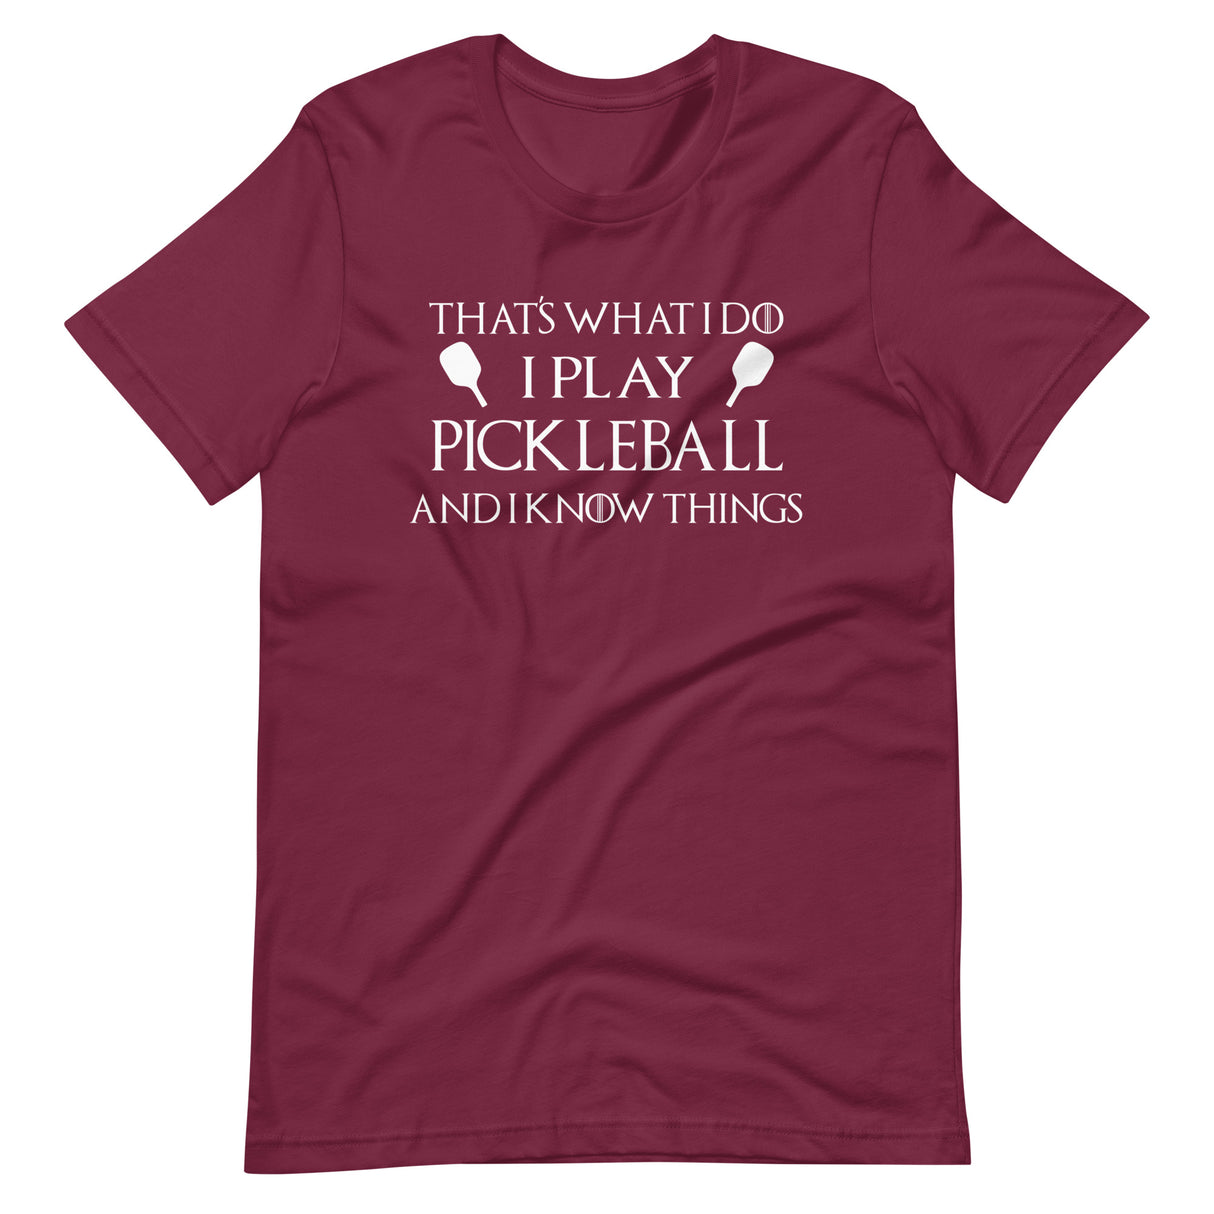 I Play Pickleball and Know Things Shirt